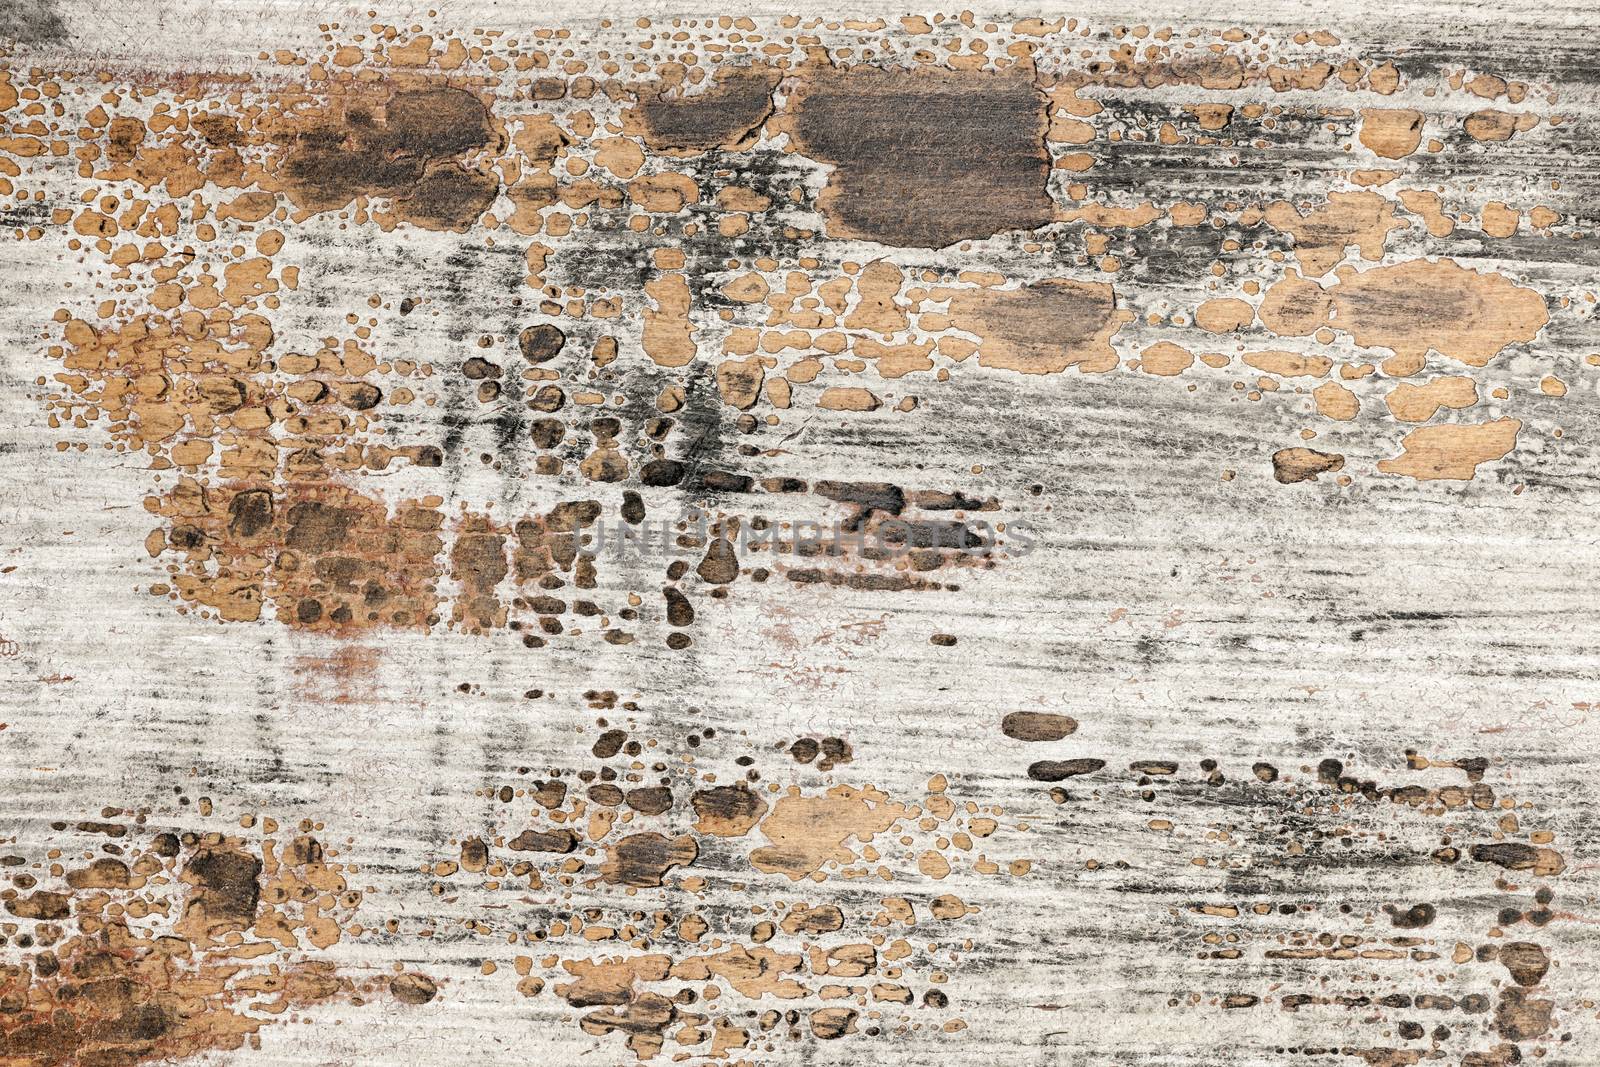 Old weathered chipped painted wood texture as grunge background